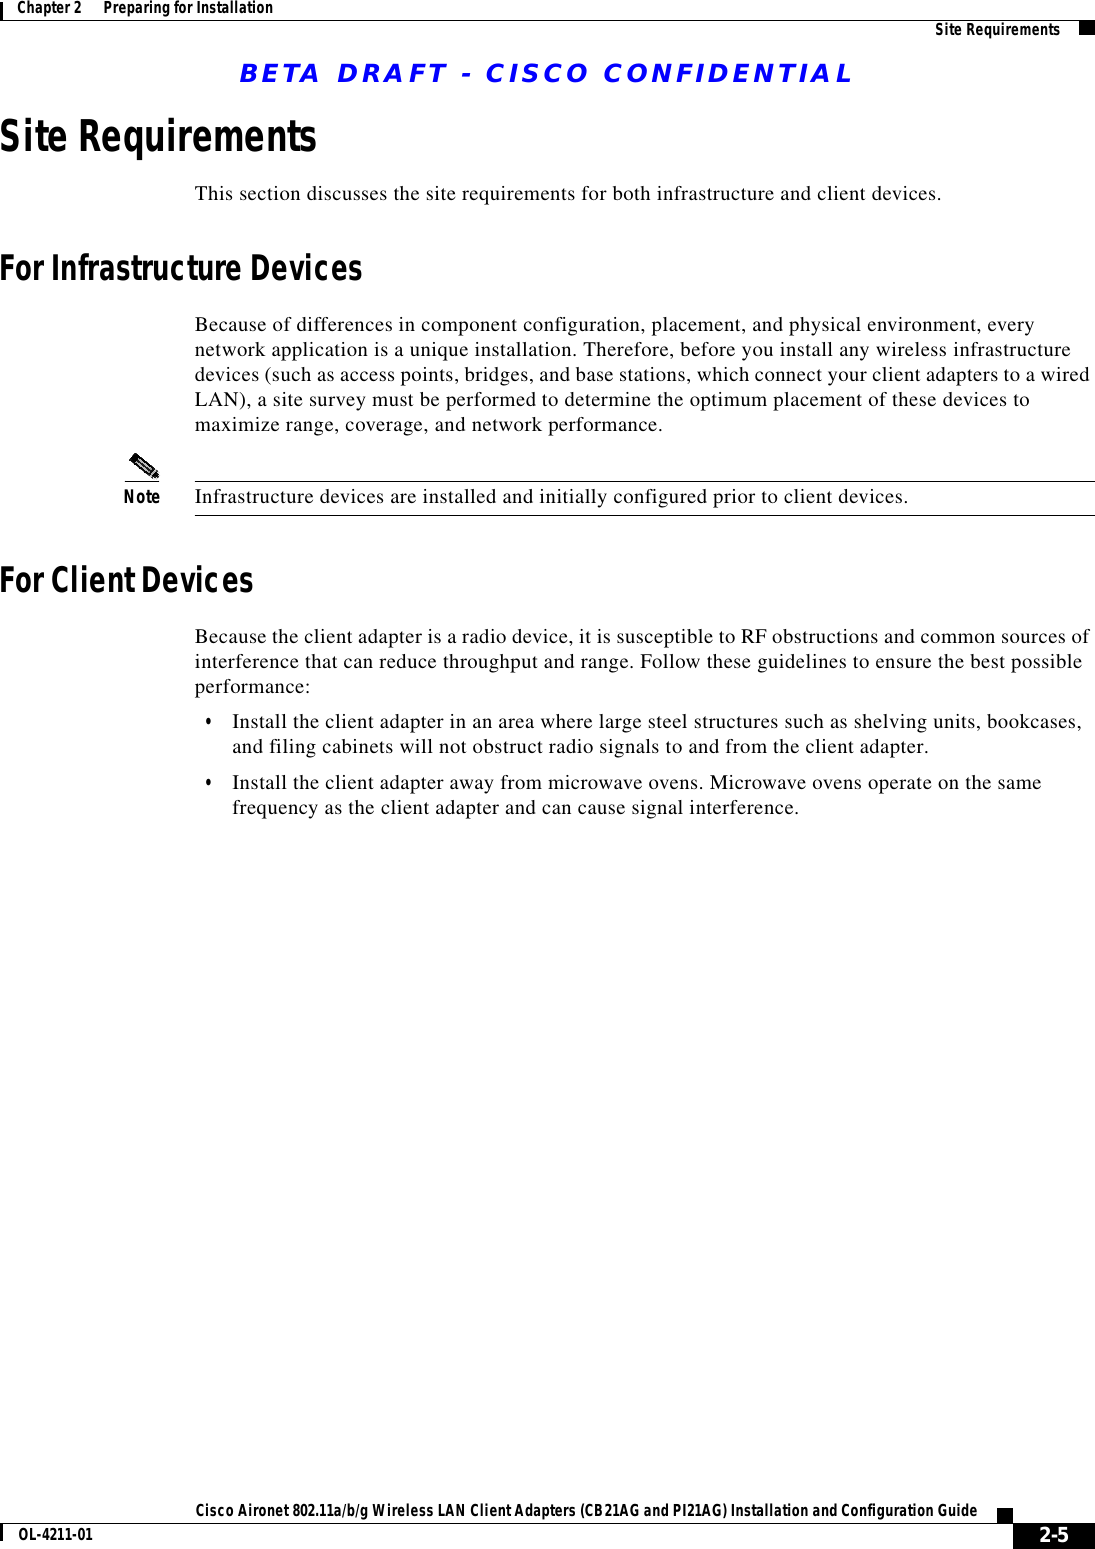 BETA DRAFT - CISCO CONFIDENTIAL2-5Cisco Aironet 802.11a/b/g Wireless LAN Client Adapters (CB21AG and PI21AG) Installation and Configuration GuideOL-4211-01Chapter 2      Preparing for Installation Site RequirementsSite RequirementsThis section discusses the site requirements for both infrastructure and client devices.For Infrastructure DevicesBecause of differences in component configuration, placement, and physical environment, every network application is a unique installation. Therefore, before you install any wireless infrastructure devices (such as access points, bridges, and base stations, which connect your client adapters to a wired LAN), a site survey must be performed to determine the optimum placement of these devices to maximize range, coverage, and network performance.Note Infrastructure devices are installed and initially configured prior to client devices.For Client DevicesBecause the client adapter is a radio device, it is susceptible to RF obstructions and common sources of interference that can reduce throughput and range. Follow these guidelines to ensure the best possible performance:•Install the client adapter in an area where large steel structures such as shelving units, bookcases, and filing cabinets will not obstruct radio signals to and from the client adapter.•Install the client adapter away from microwave ovens. Microwave ovens operate on the same frequency as the client adapter and can cause signal interference.